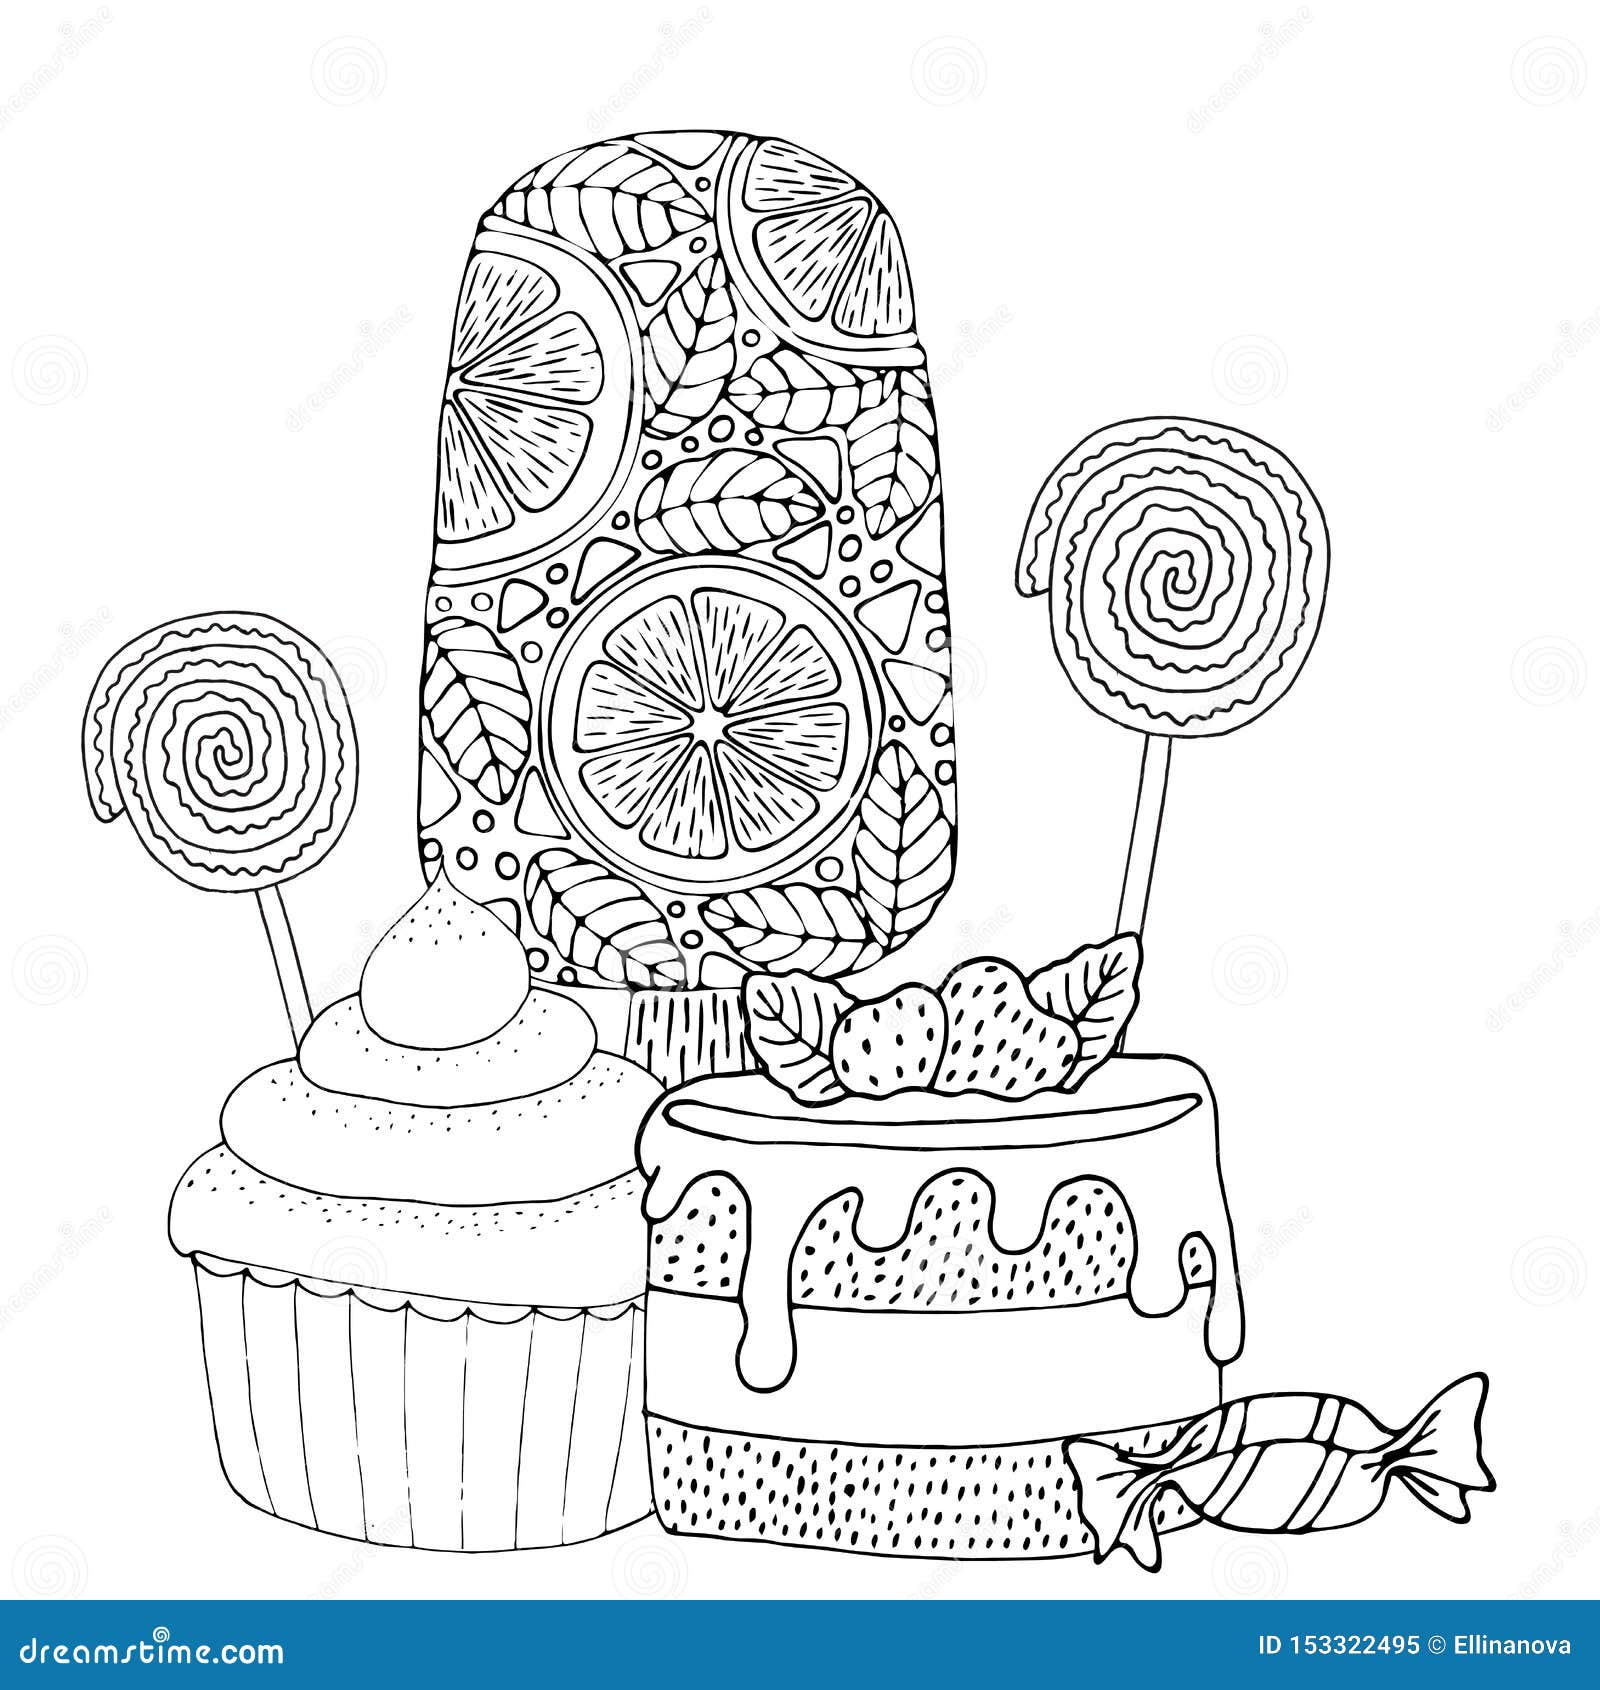 Download Coloring Page With Cake, Ice Cream, Cupcake, Candy And ...